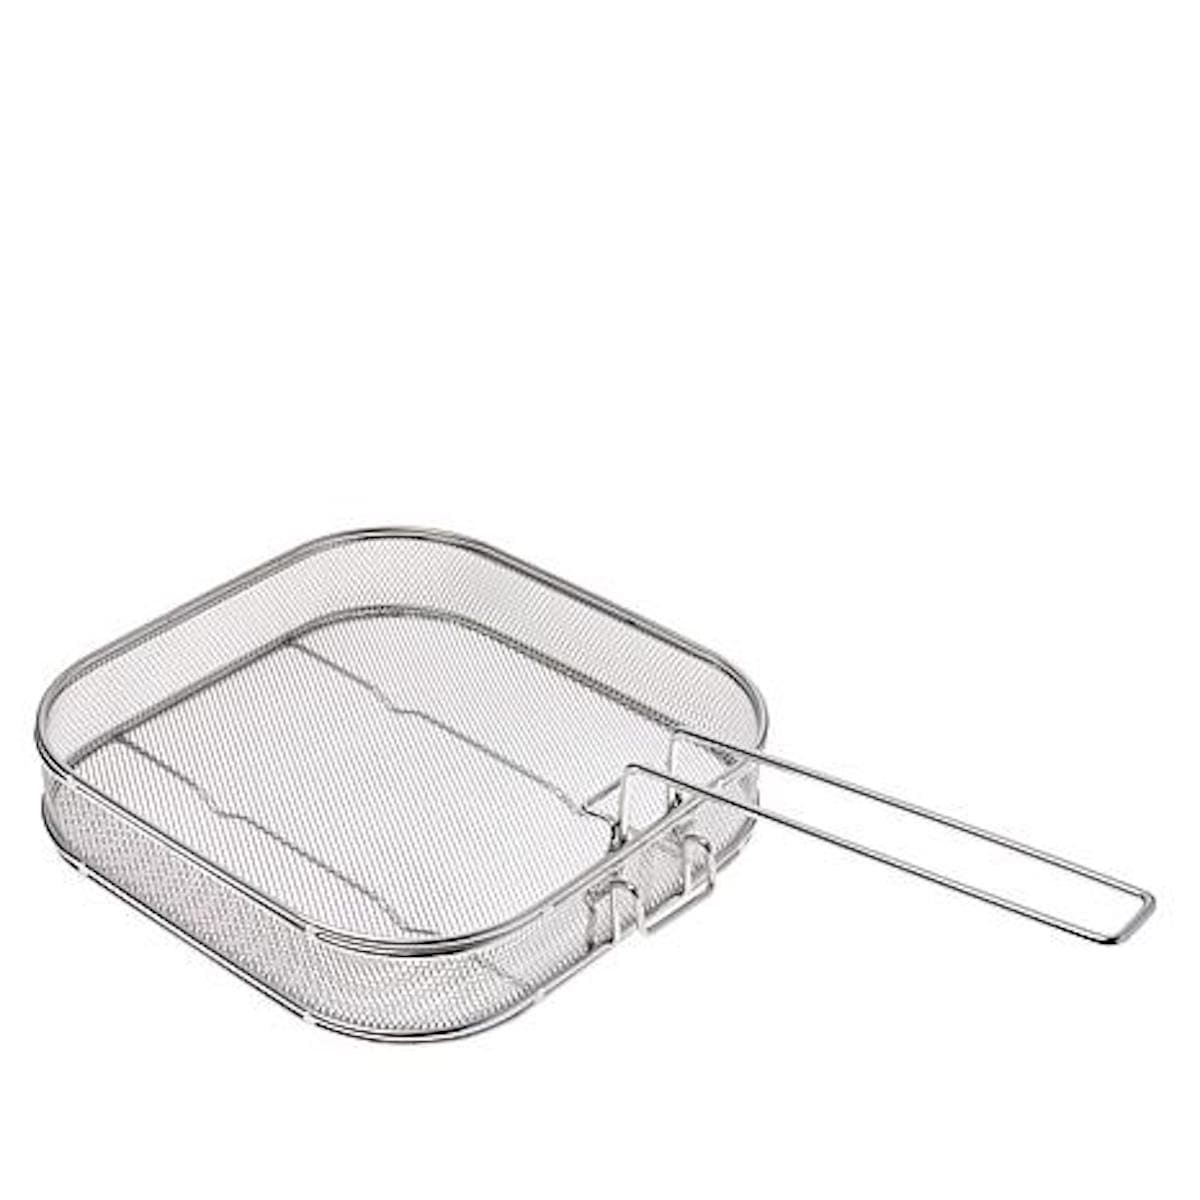 https://ak1.ostkcdn.com/images/products/is/images/direct/797d992e8c9a157b395ec67b3faf83038c71d530/Curtis-Stone-Stainless-Steel-Easy-Lift-Basket--Refurbished.jpg